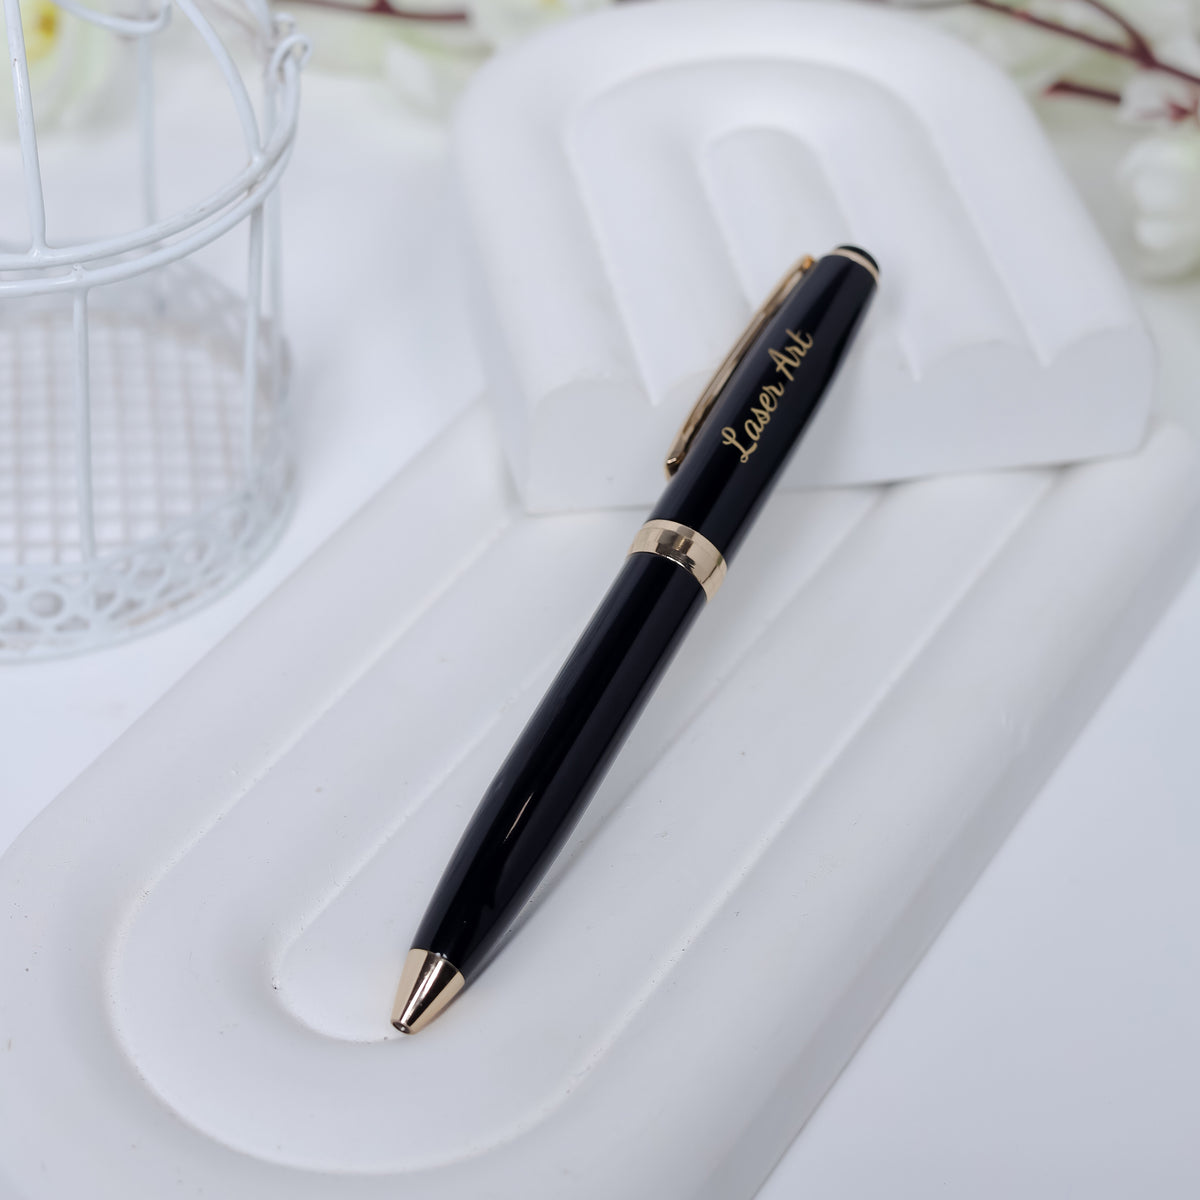 Elegant Black and Gold Ballpoint Pen with Personalized Laser Engraving - A Stylish Choice for Wedding Favors or Corporate Gifts